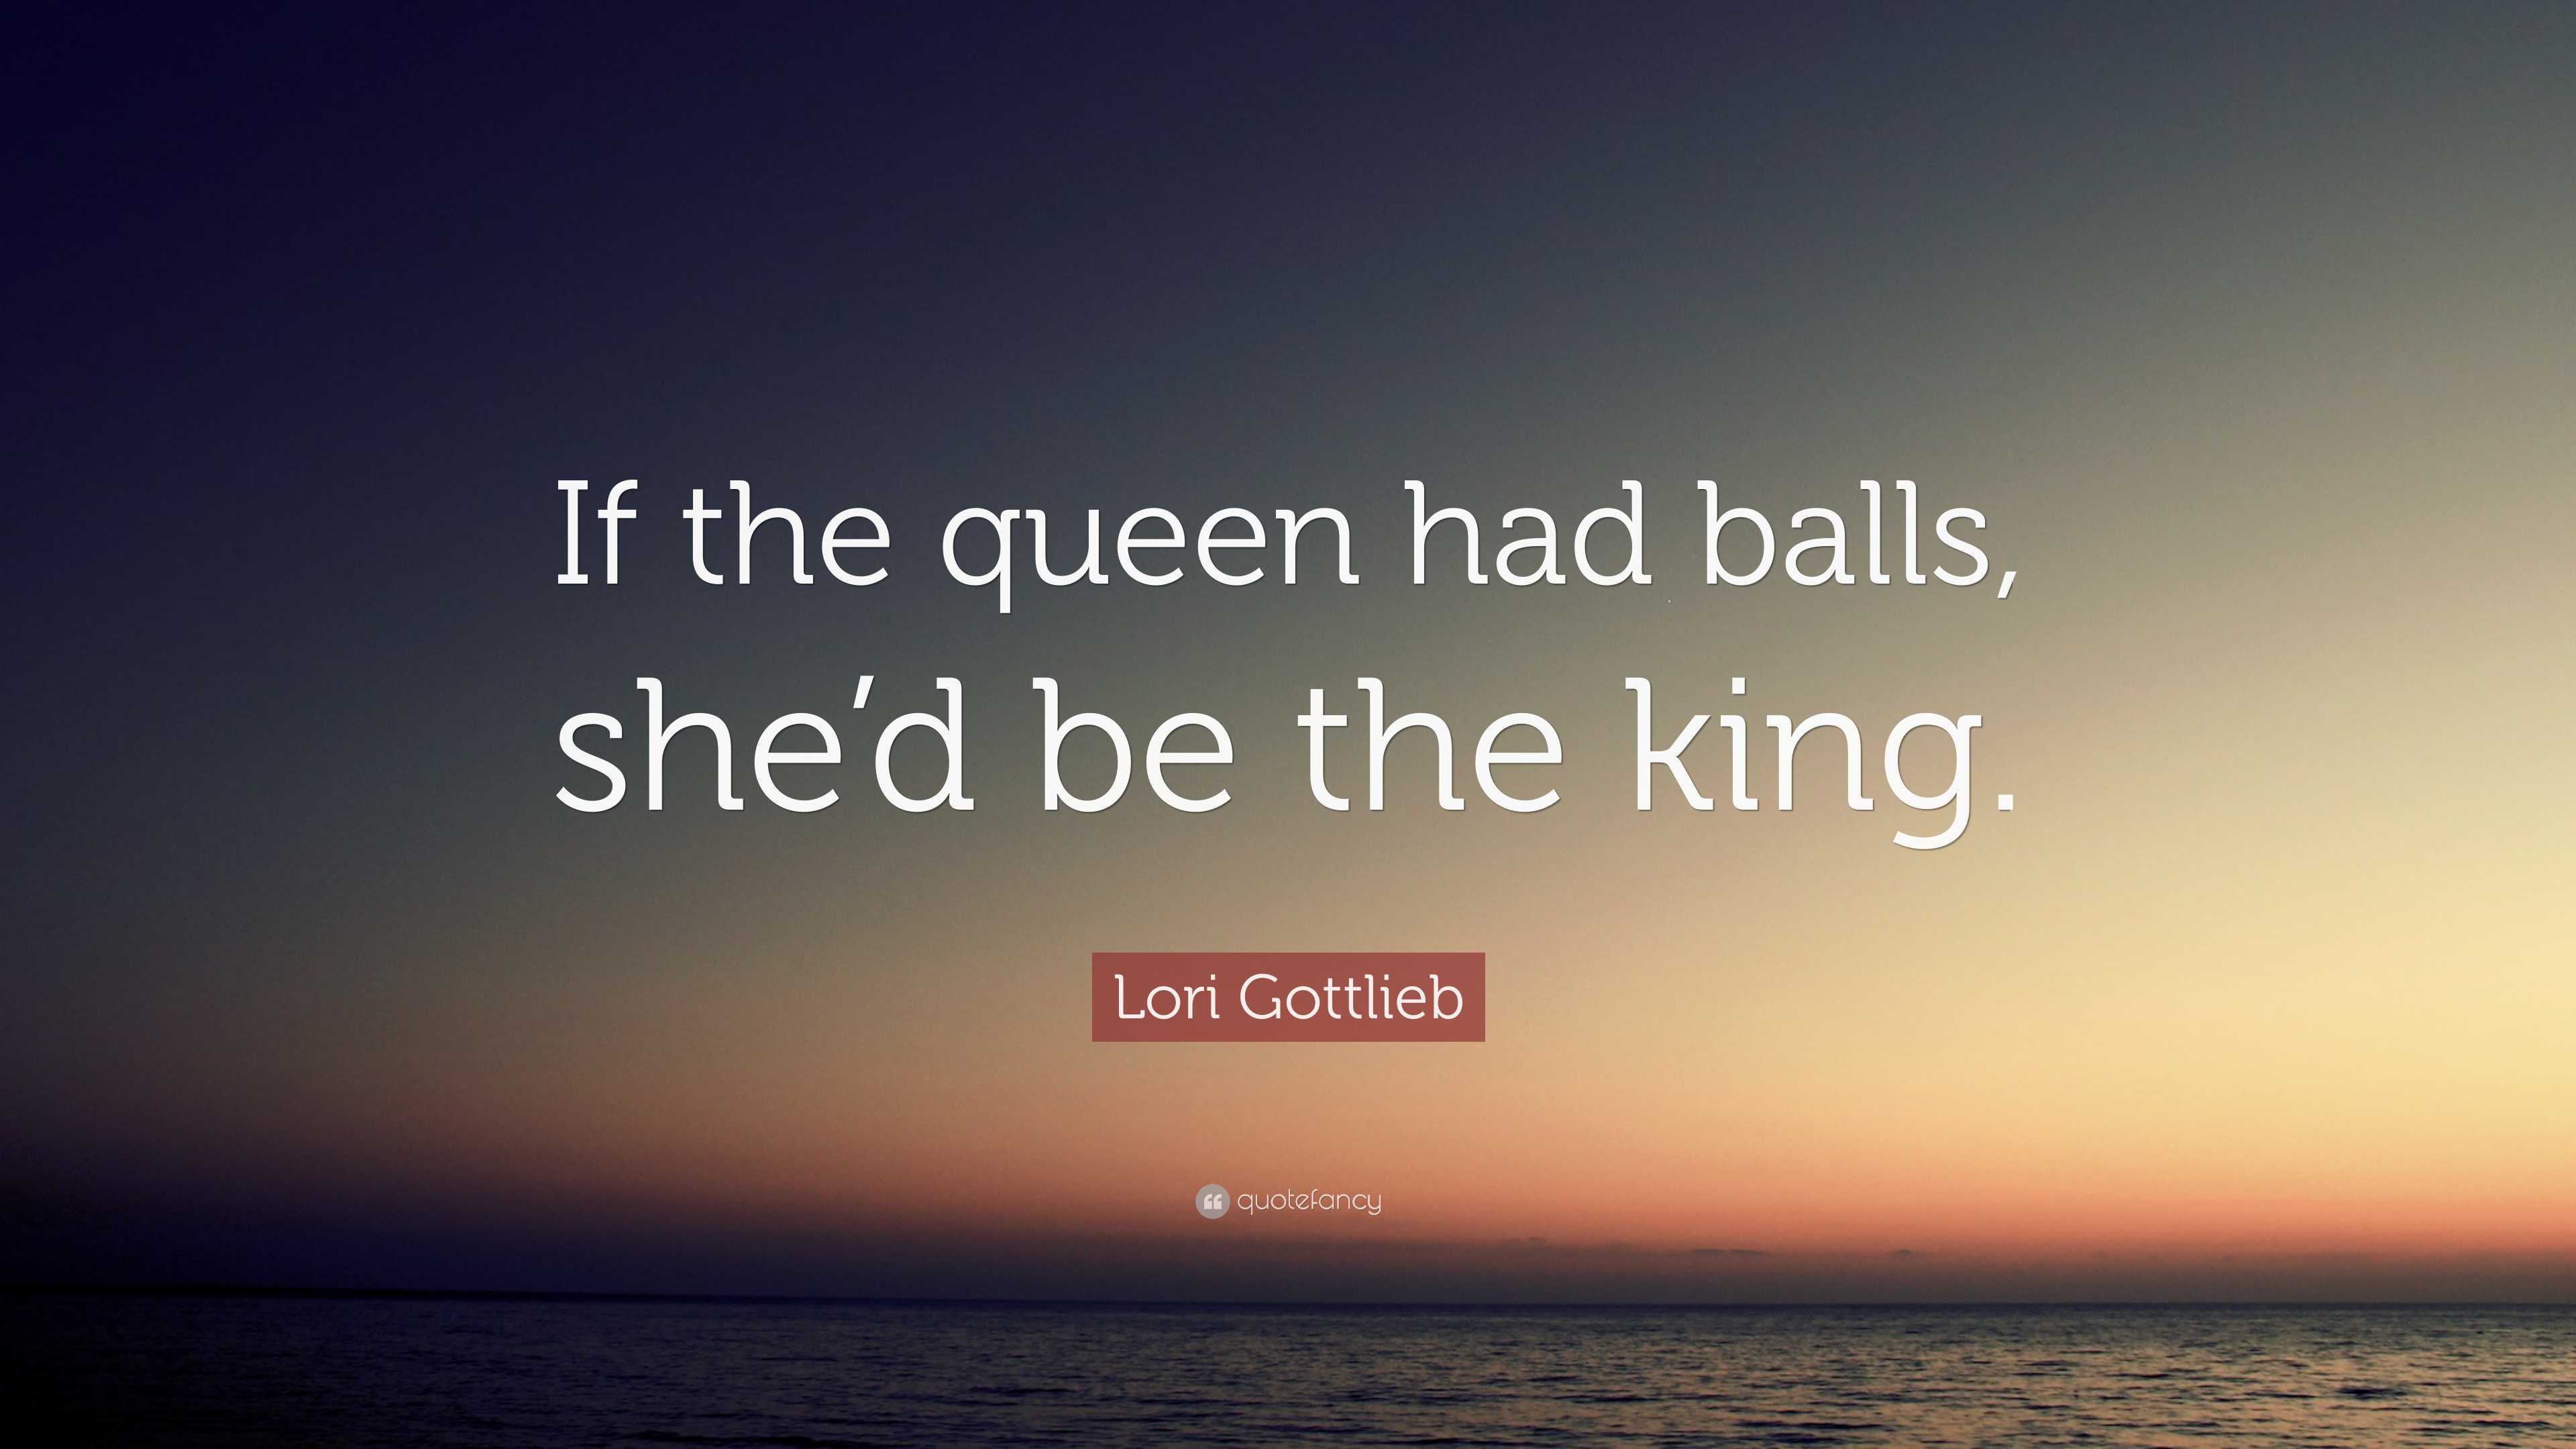 Lori Gottlieb Quote: “If the queen had balls, she’d be the king.”